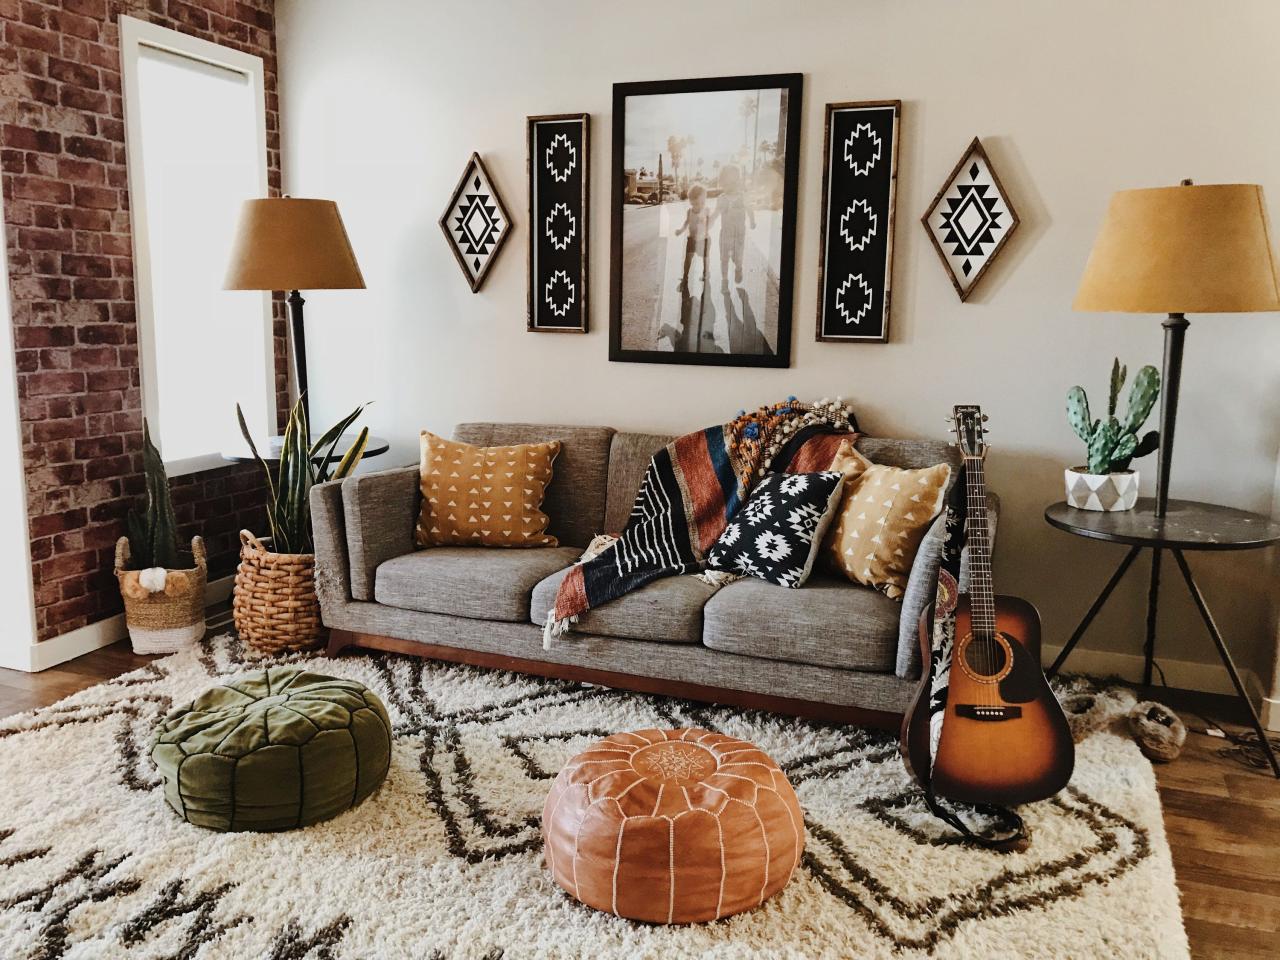 Urban Bohemian: Eclectic and Boho-Inspired Living Room Design Ideas